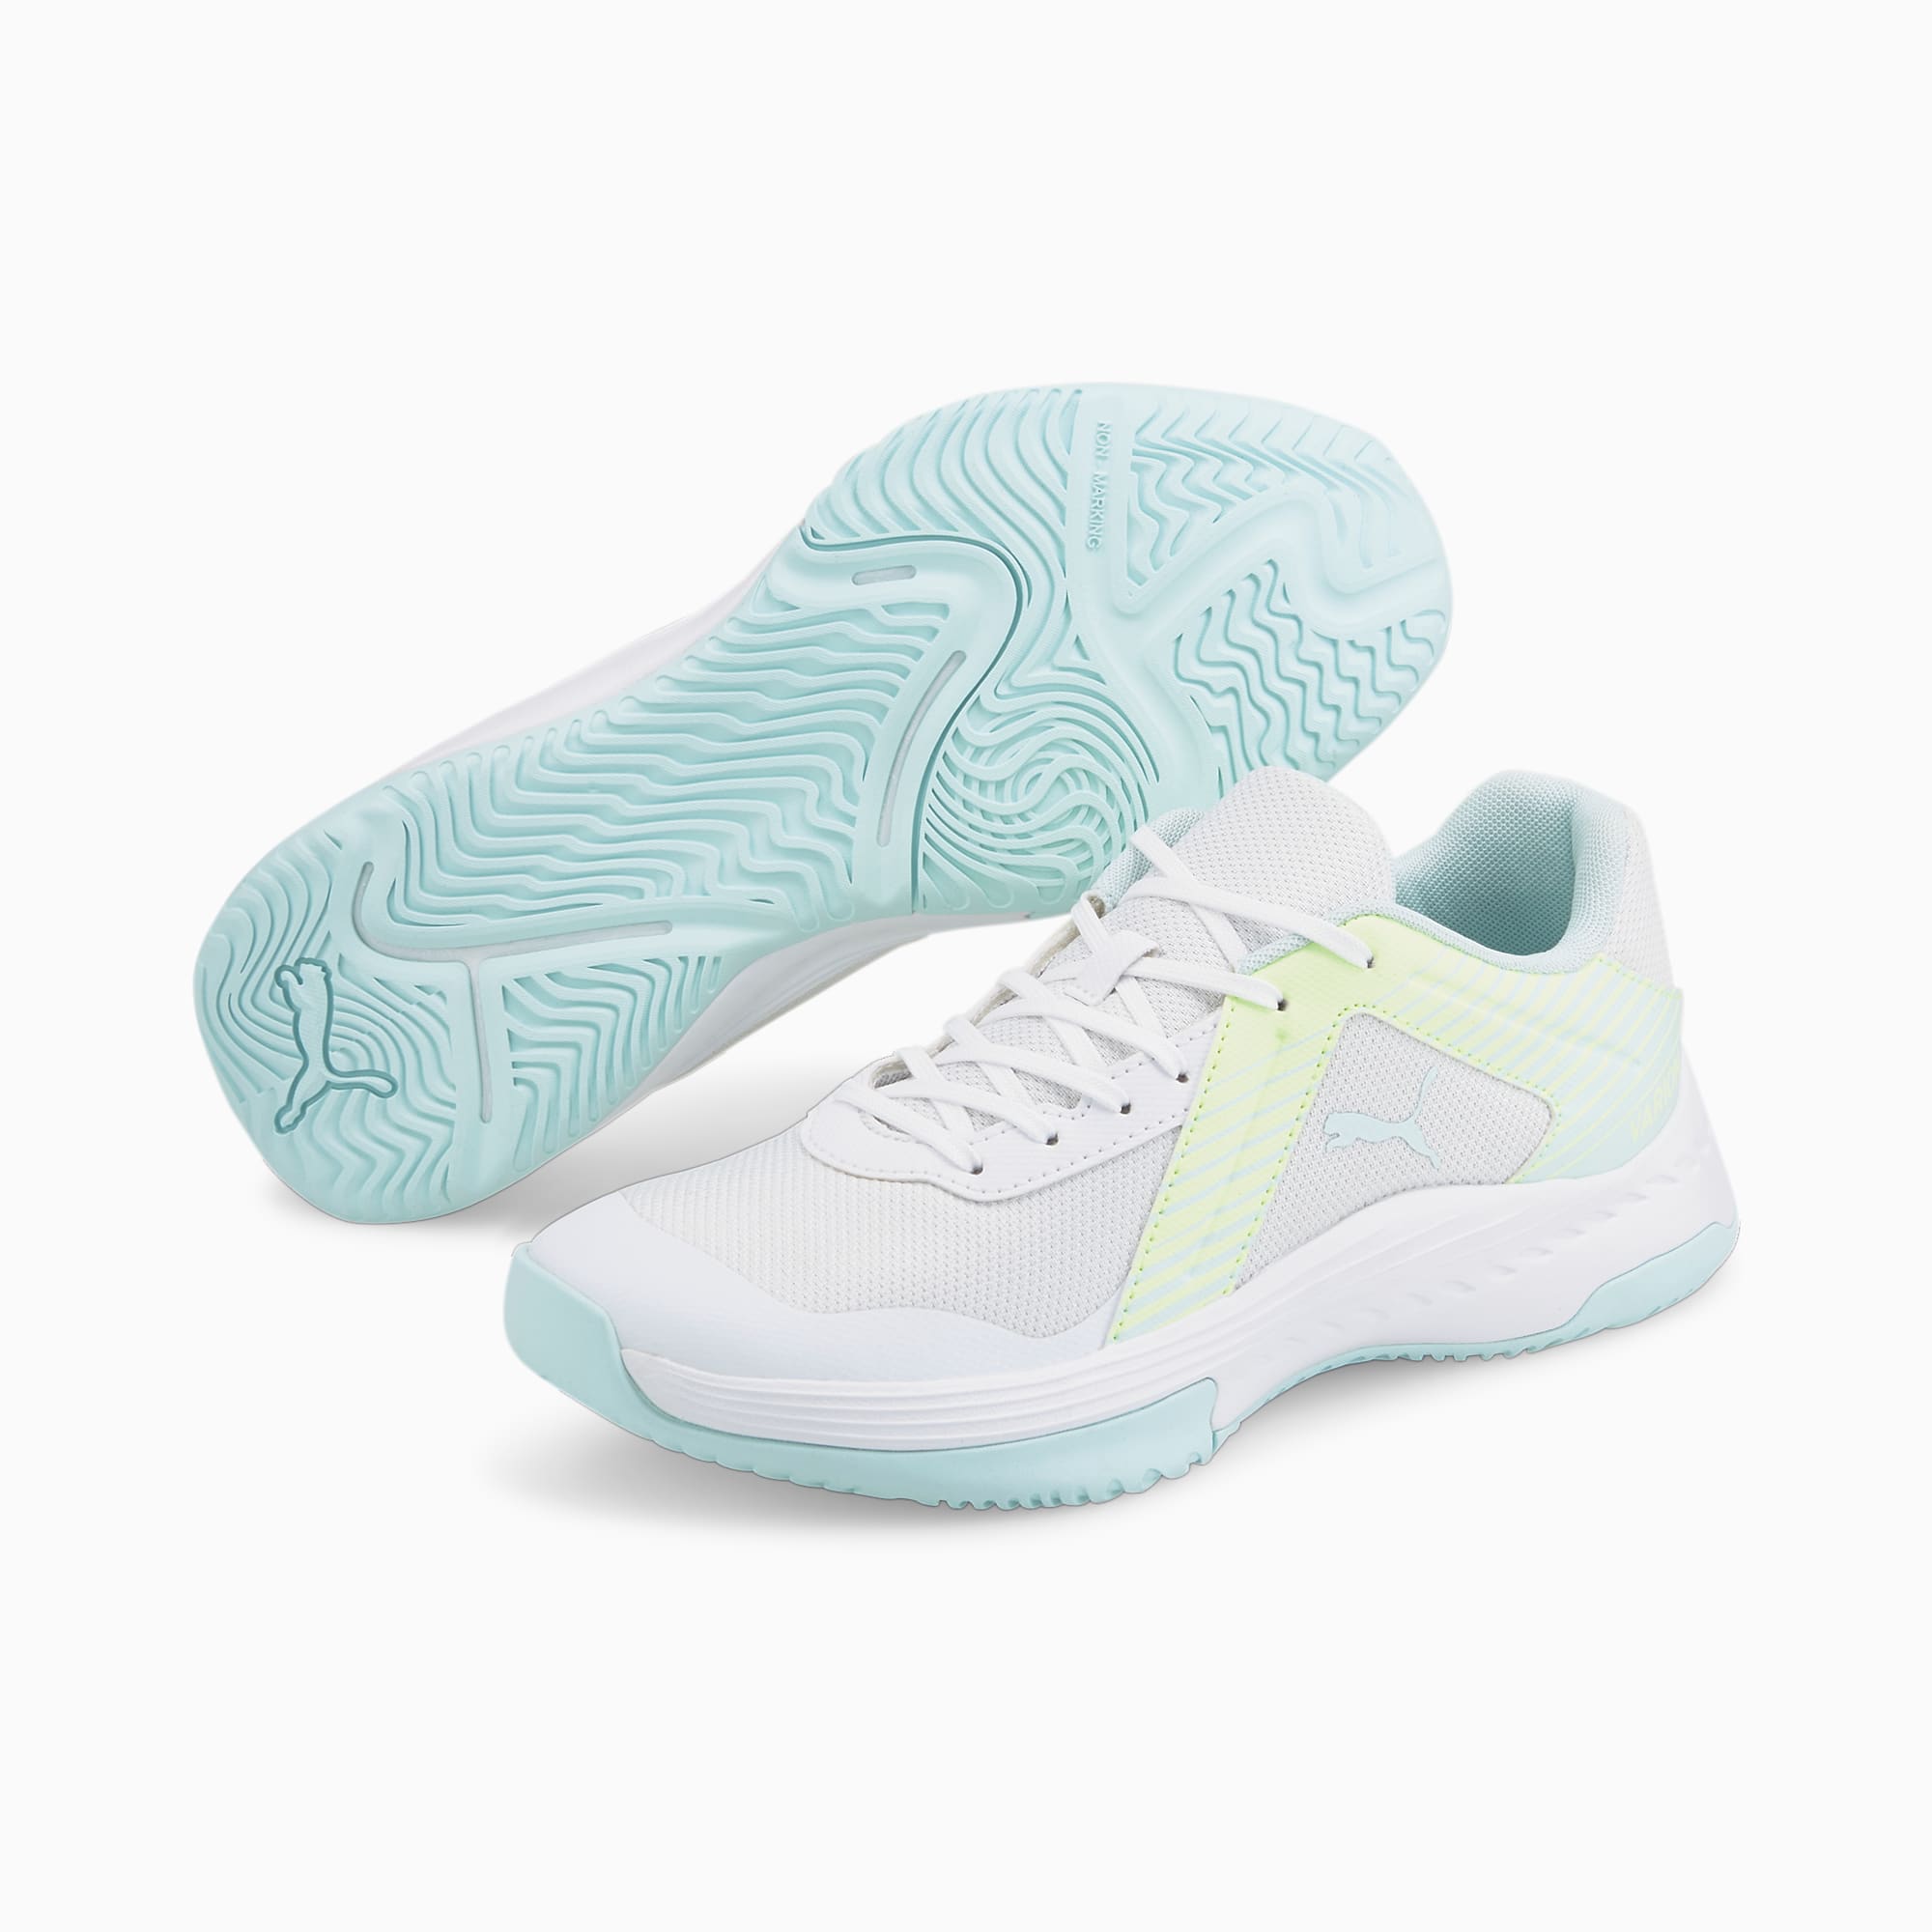 Women's PUMA Varion Indoor Sports Shoe Sneakers, White/Nitro Blue/Fizzy Light, Size 35,5, Shoes